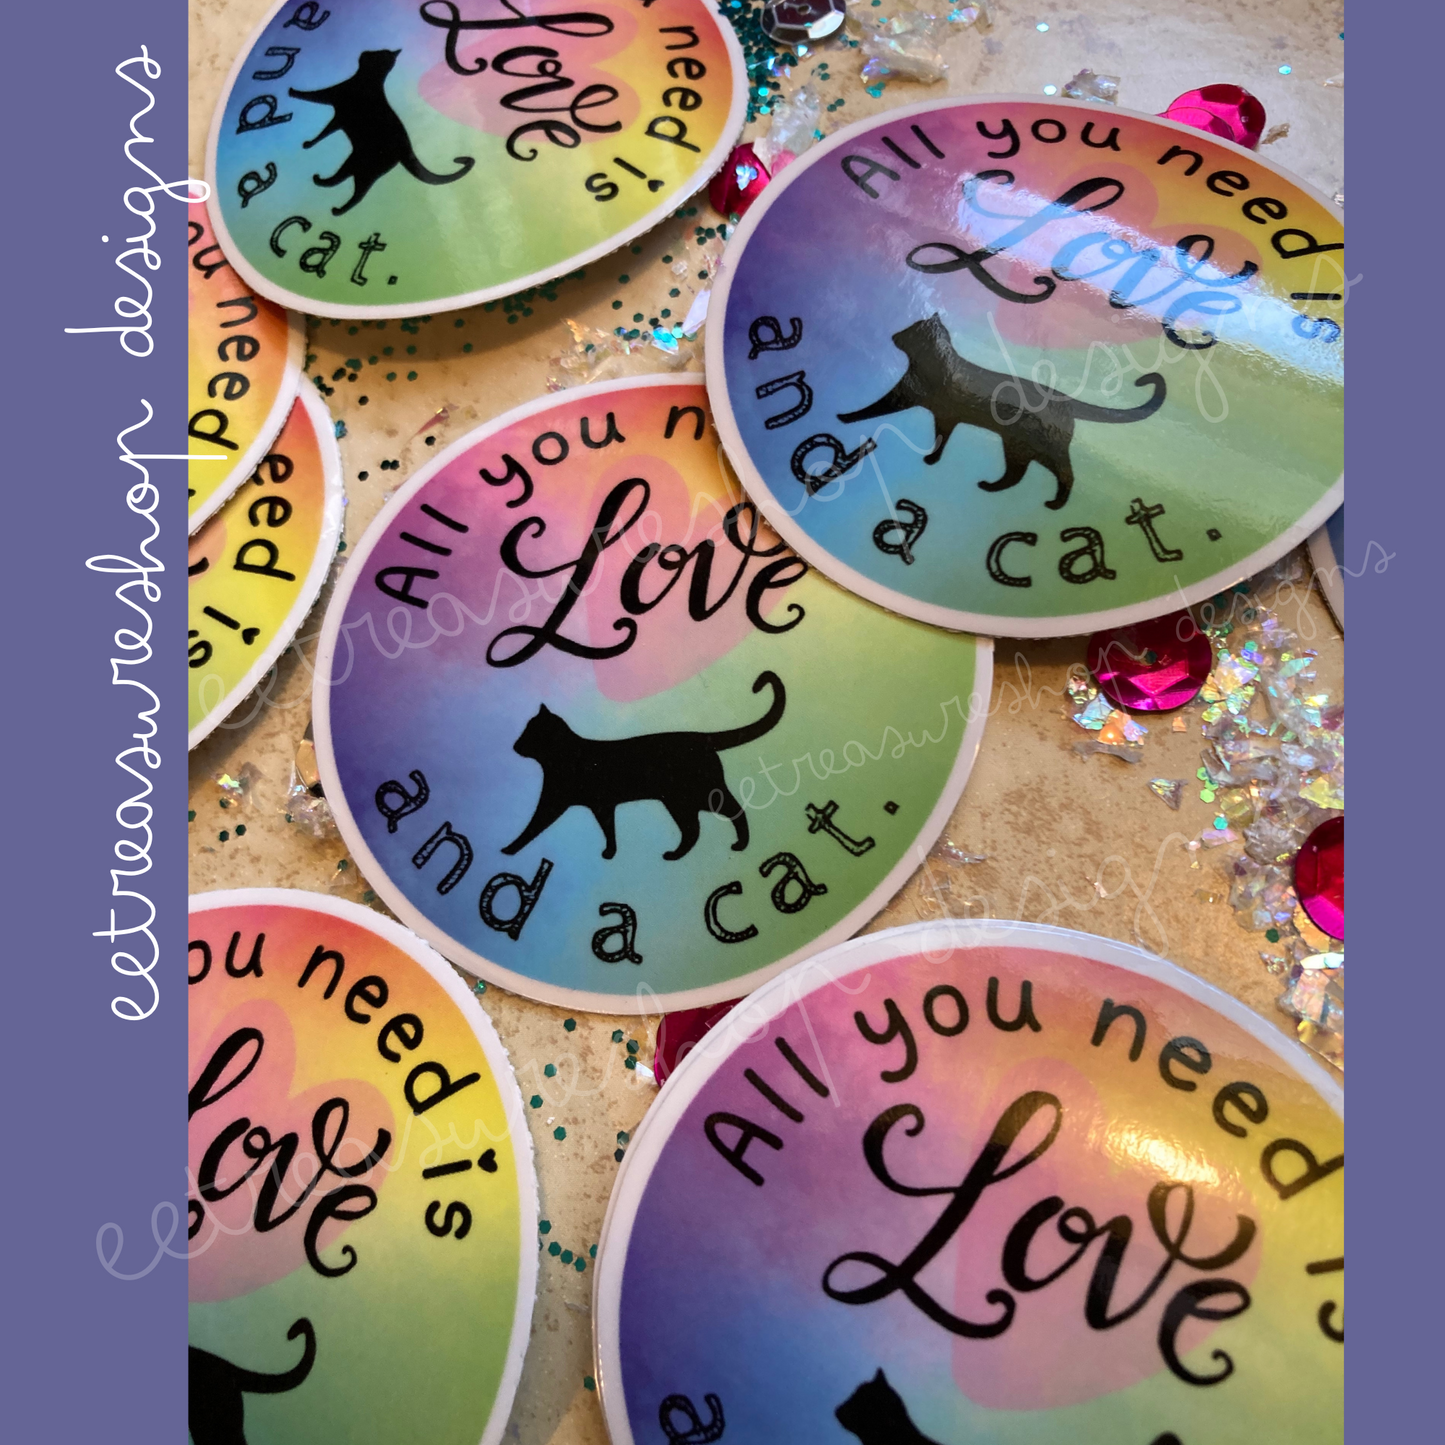 All You Need is Love and a Cat Vinyl Waterproof Sticker